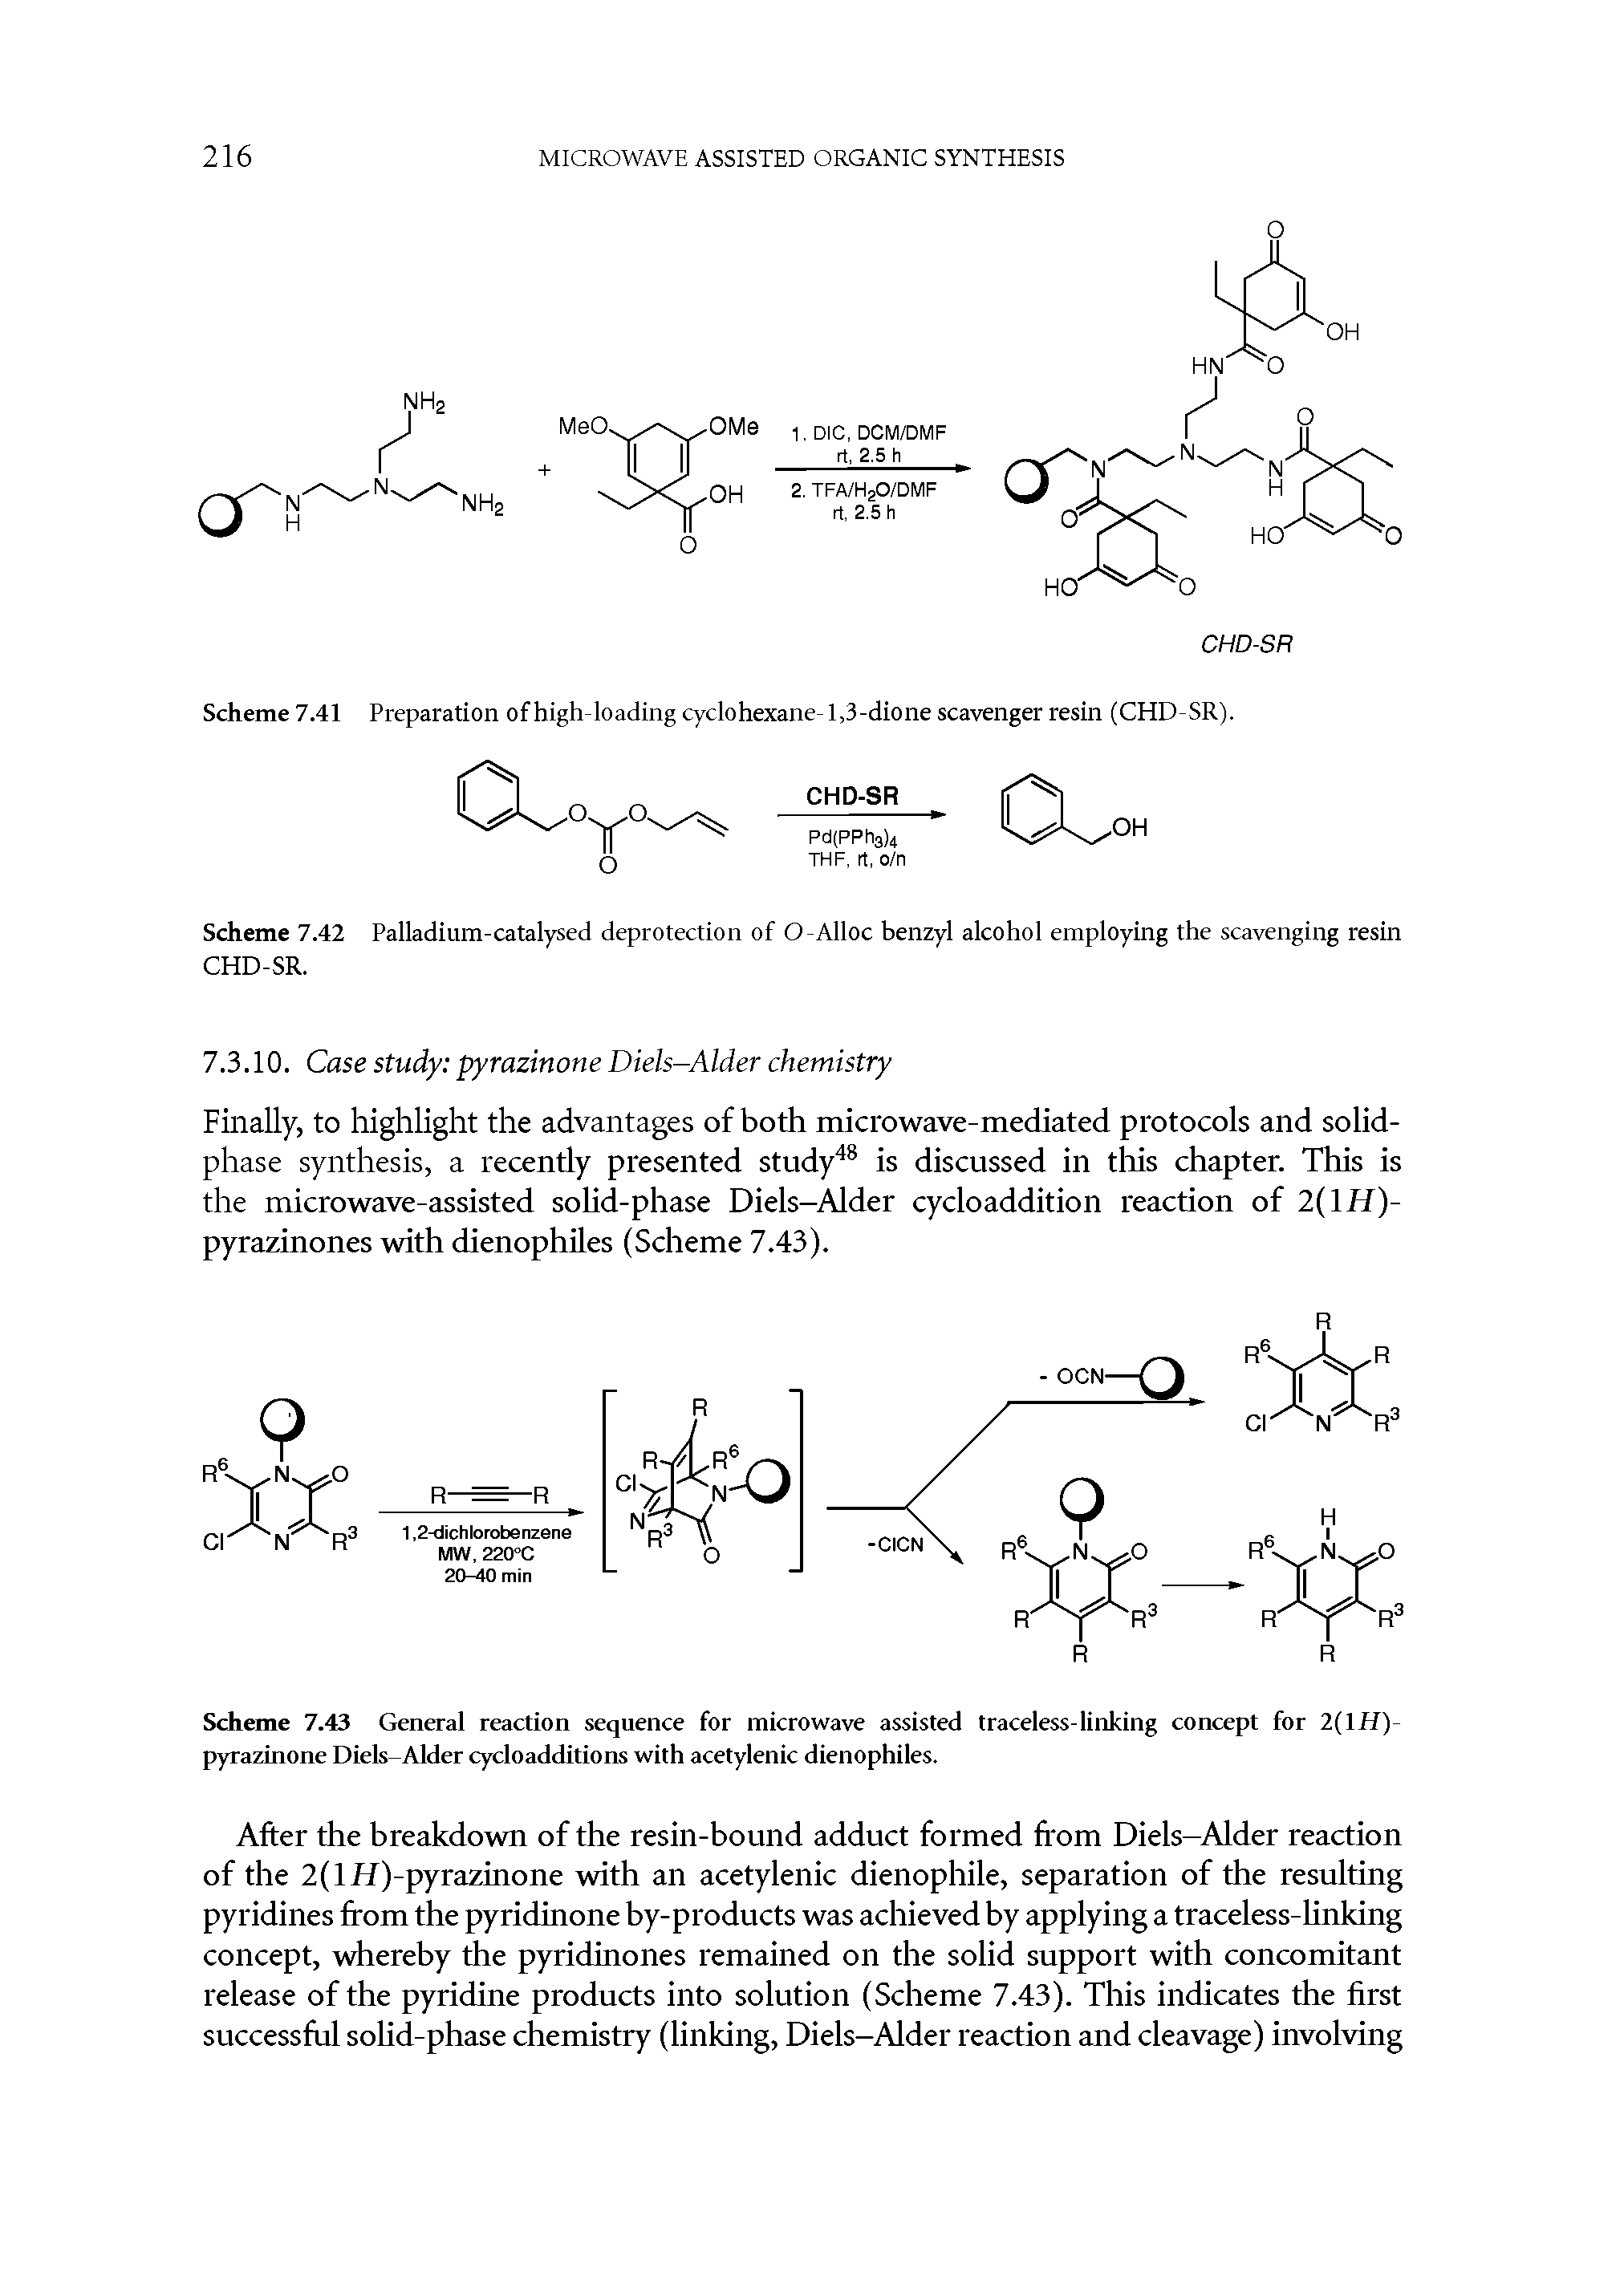 Scheme 7.43 General reaction sequence for microwave assisted traceless-linking concept for 2(liT)-pyrazinone Diels-Alder cycloadditions with acetylenic dienophiles.